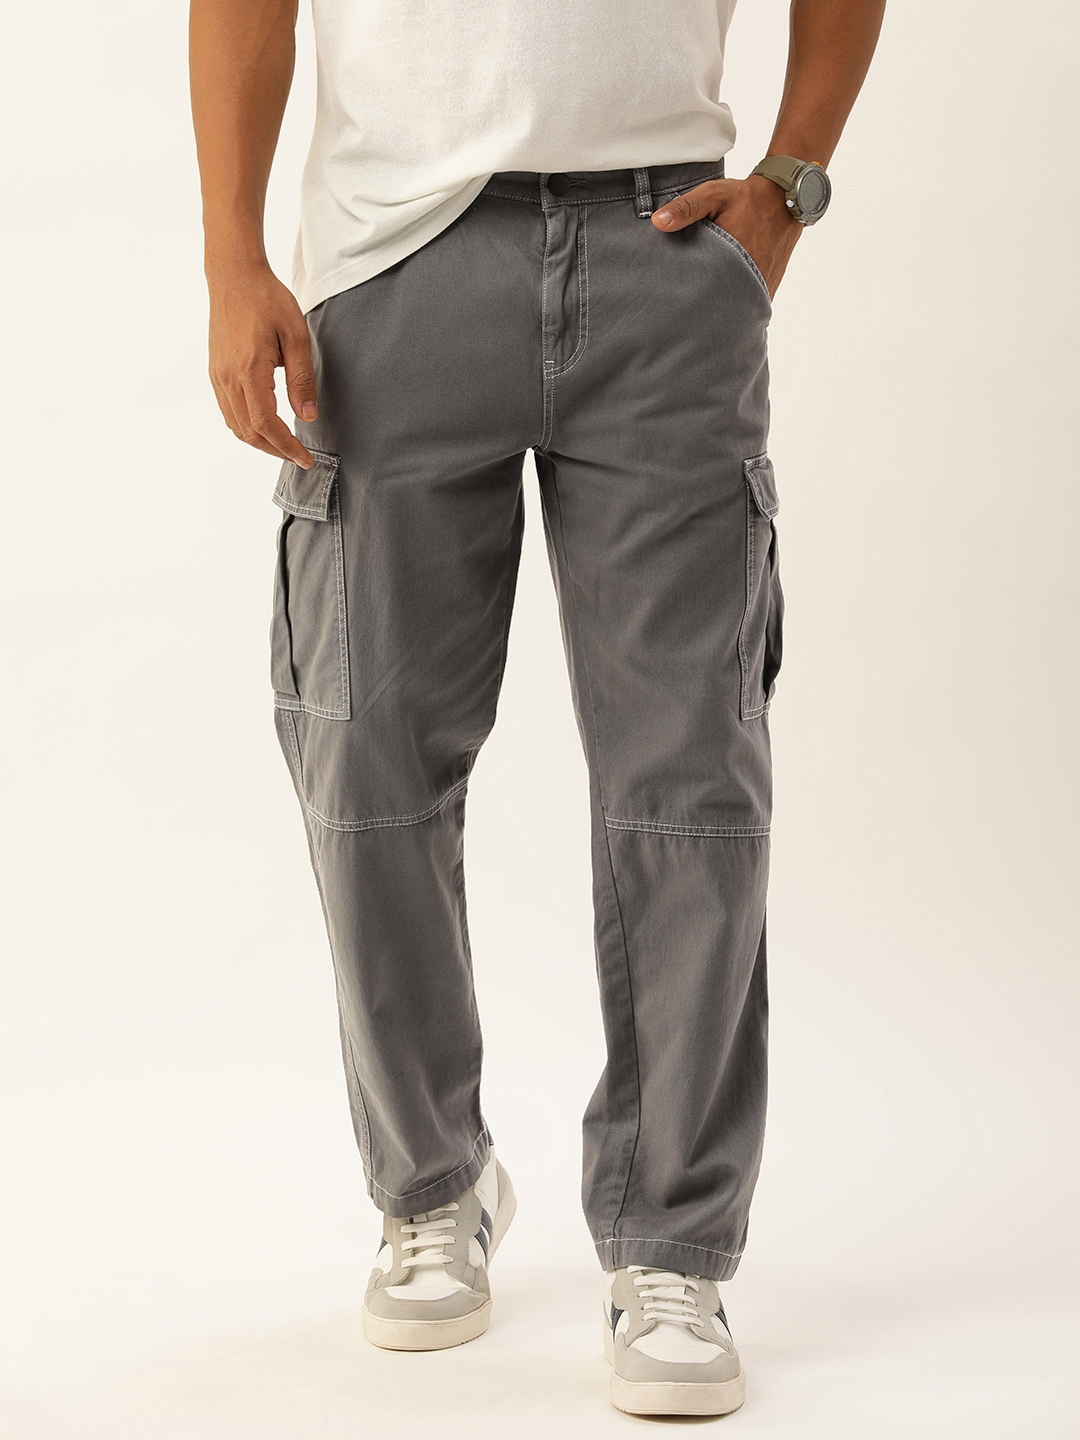 Buy Bene Kleed Men Relaxed Fit Cotton Cargos Trousers With